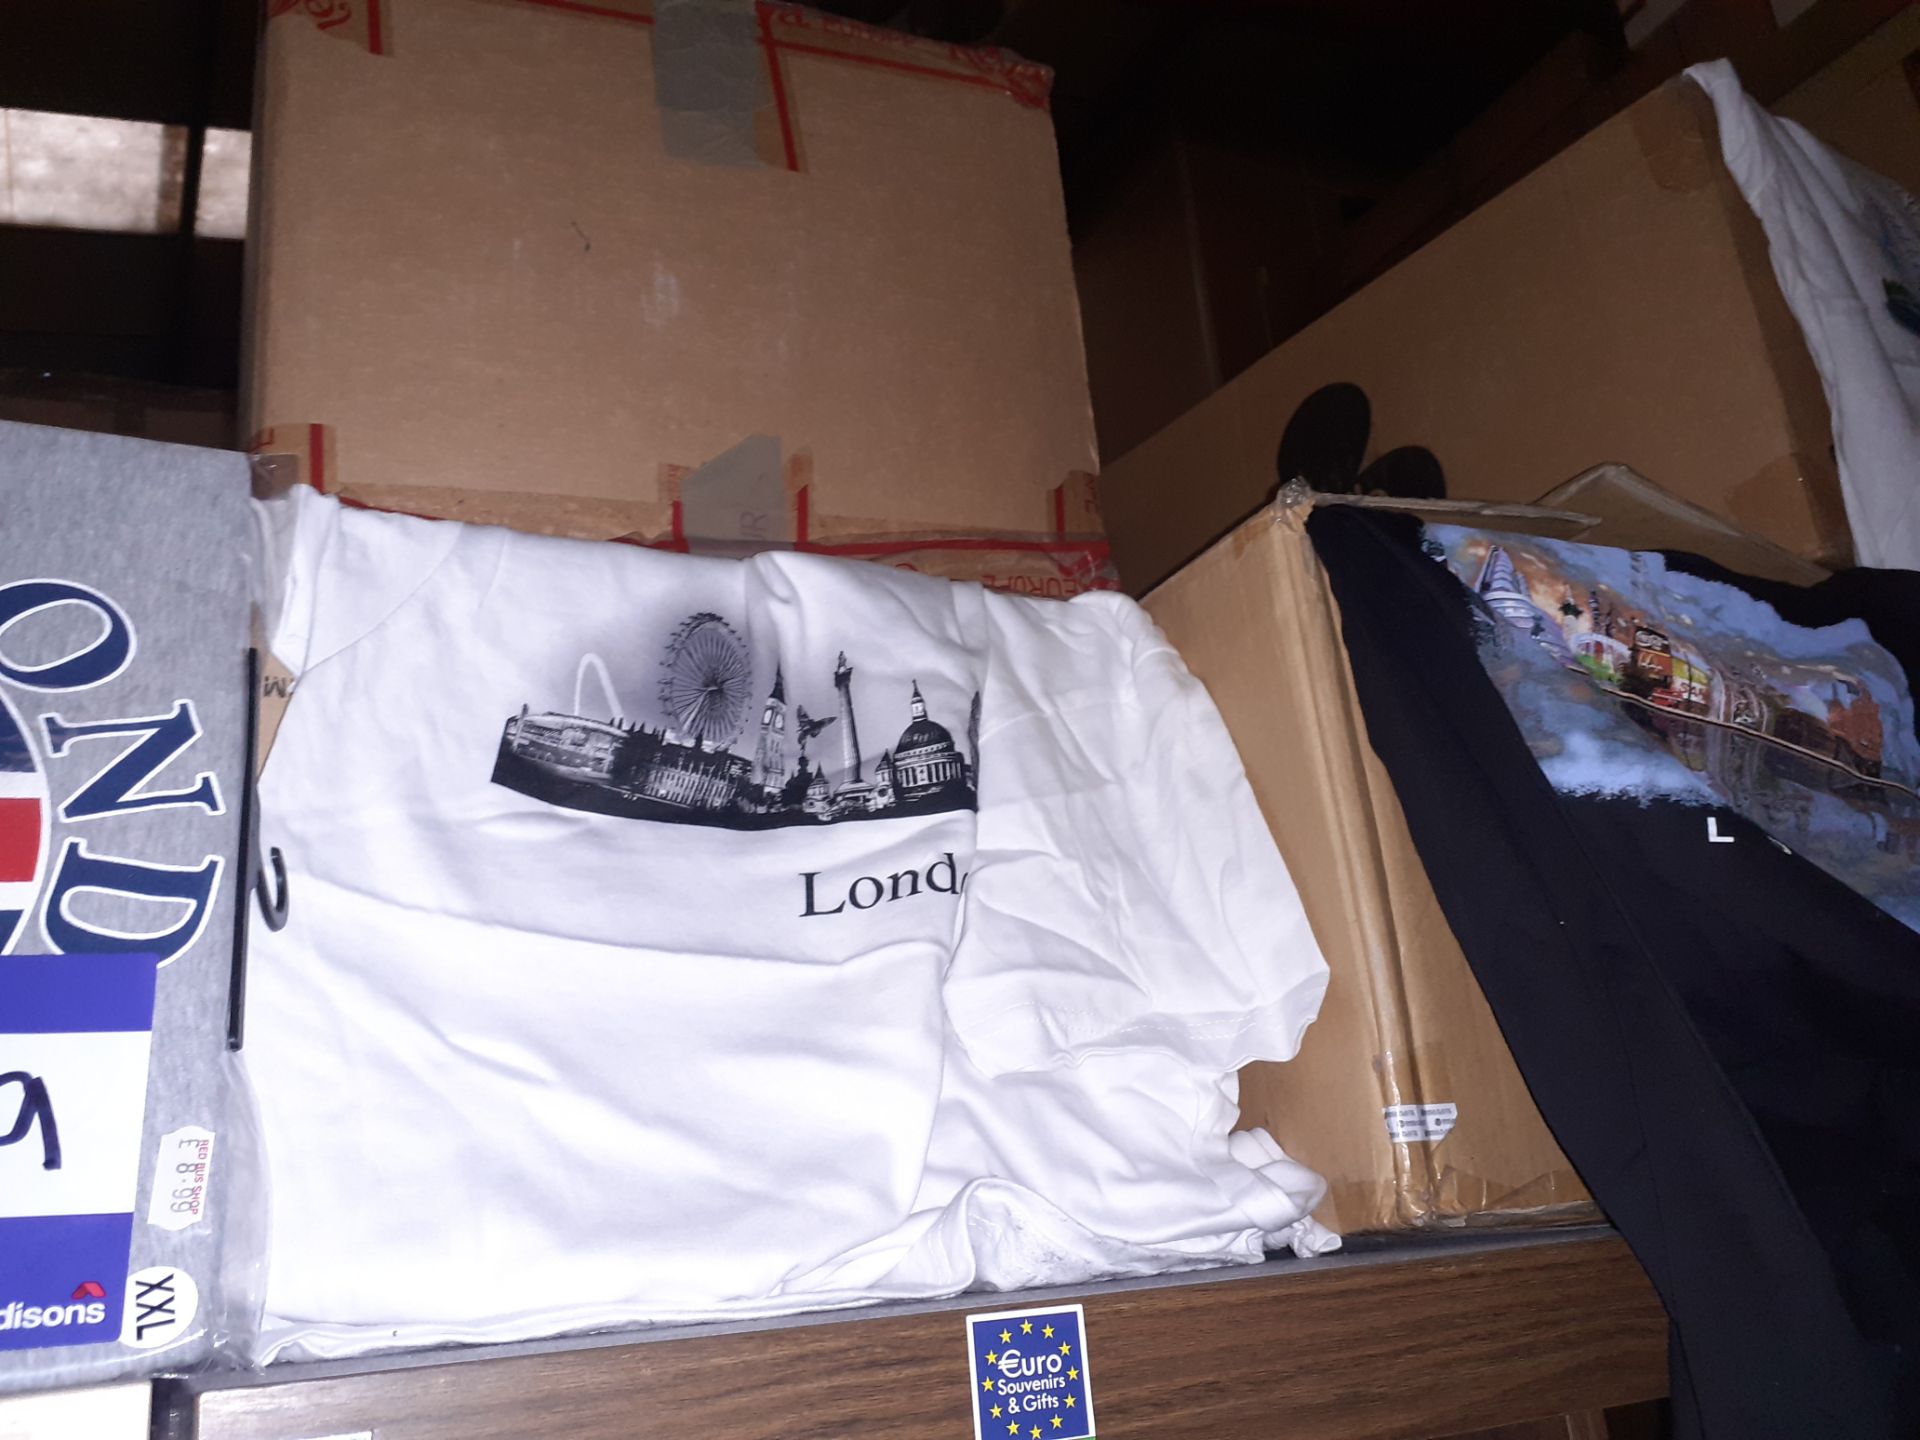 Ten Boxes of Mainly London & Scotland Themed T-Shirts to Top of Shelving - Image 3 of 4